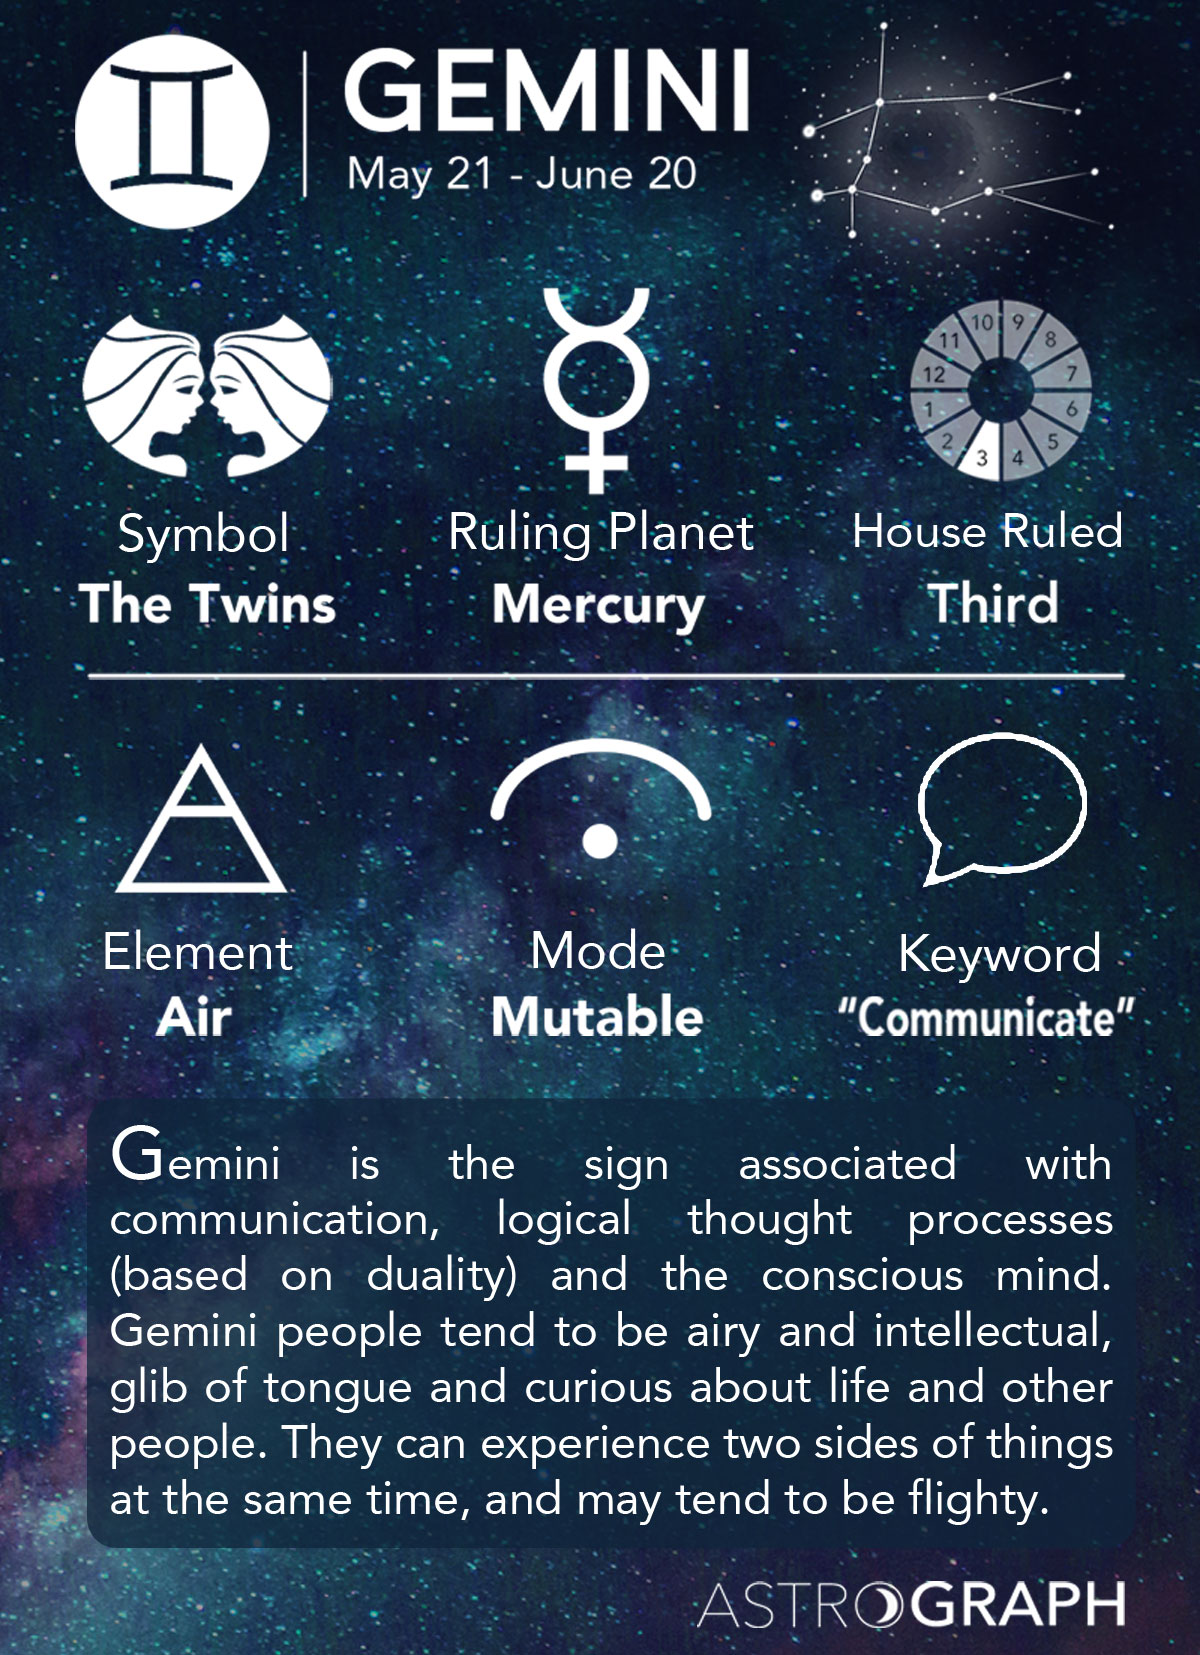 What dates is a Gemini?